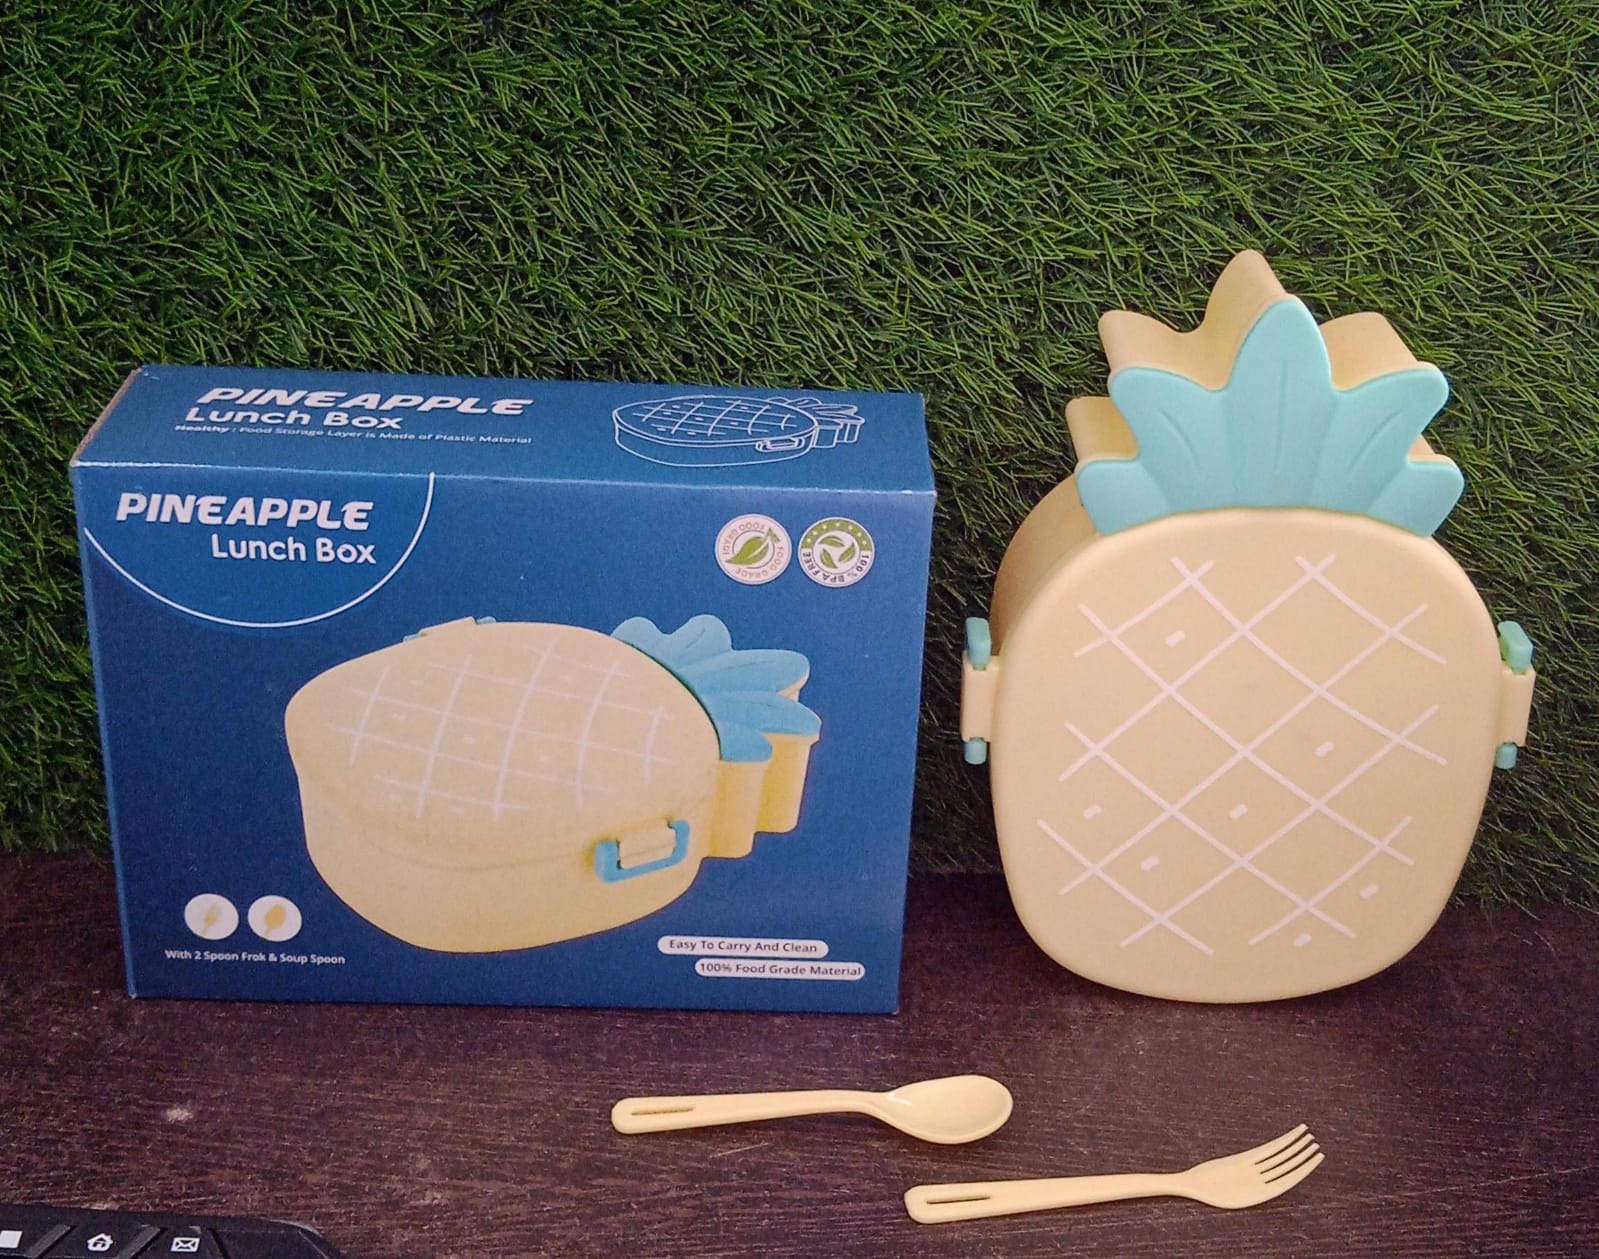 5729 Kids Lunch Box Cute Pineapple Shaped Bento Box with Fork Spoon Snack Candy Container Microwave Portable Office Lunch Box (1 Pc / With Spoon, Fork & Color Box)